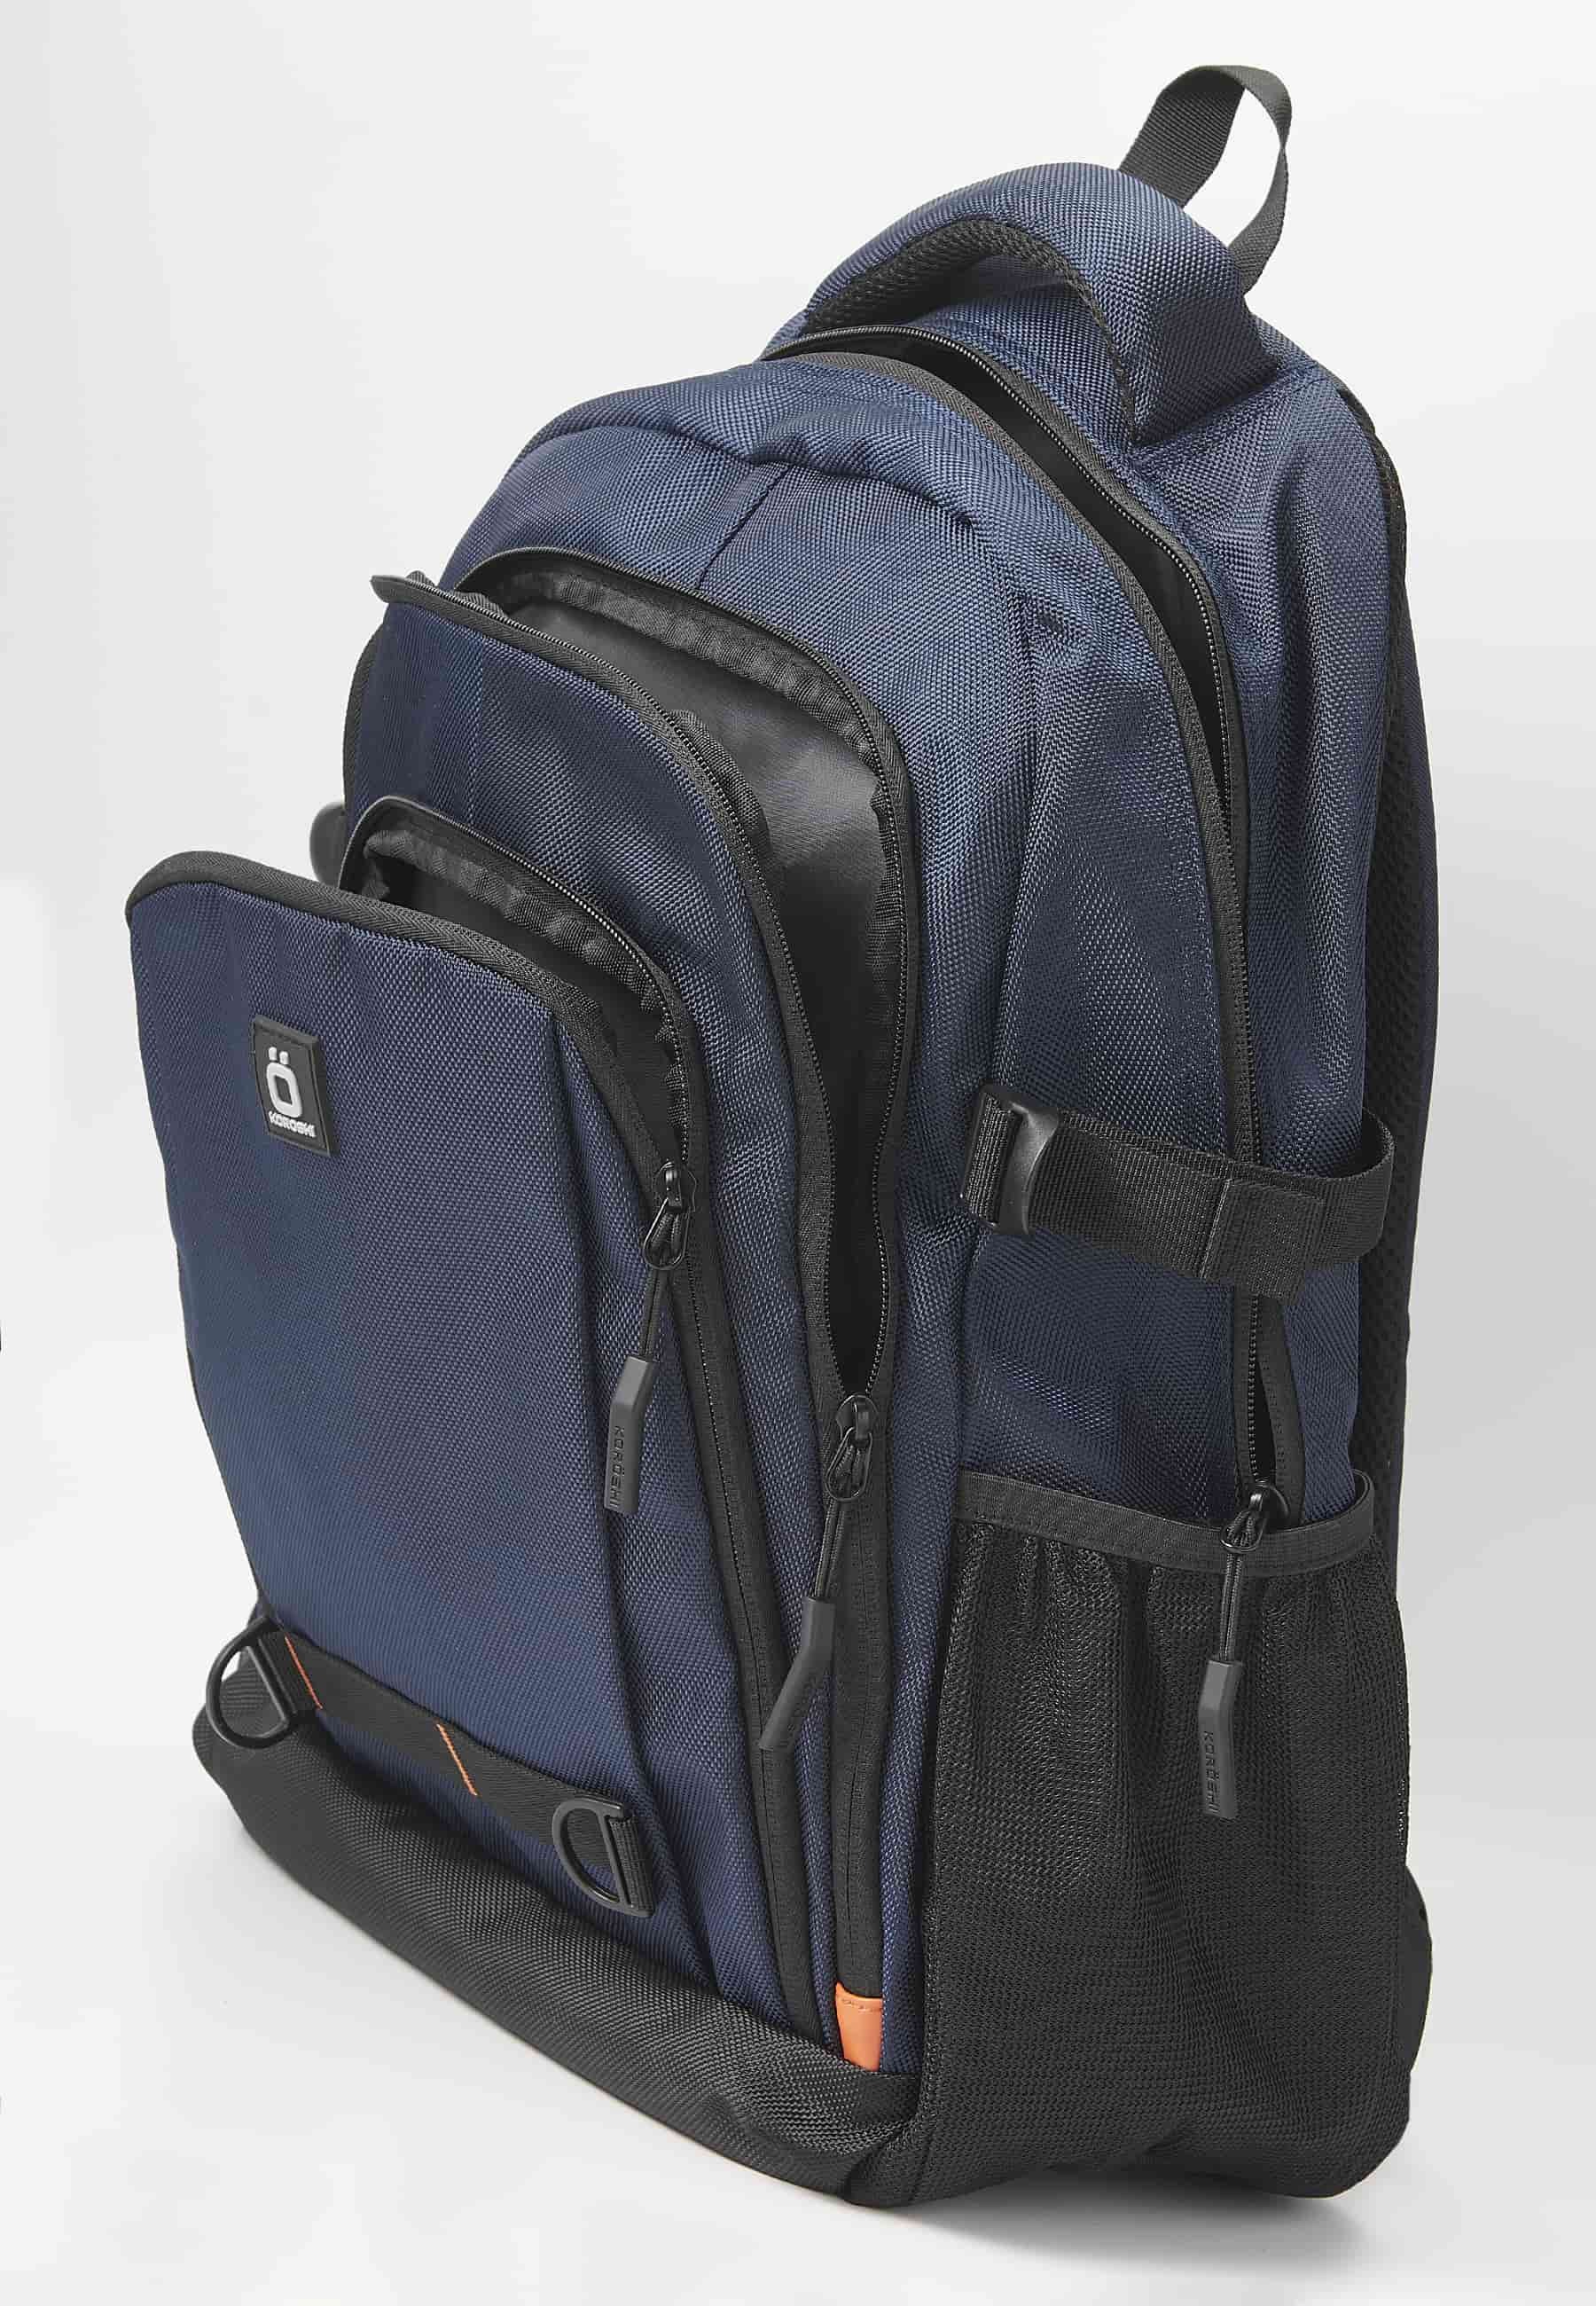 Koröshi backpack with three zippered compartments, one for a laptop, with Navy interior pockets